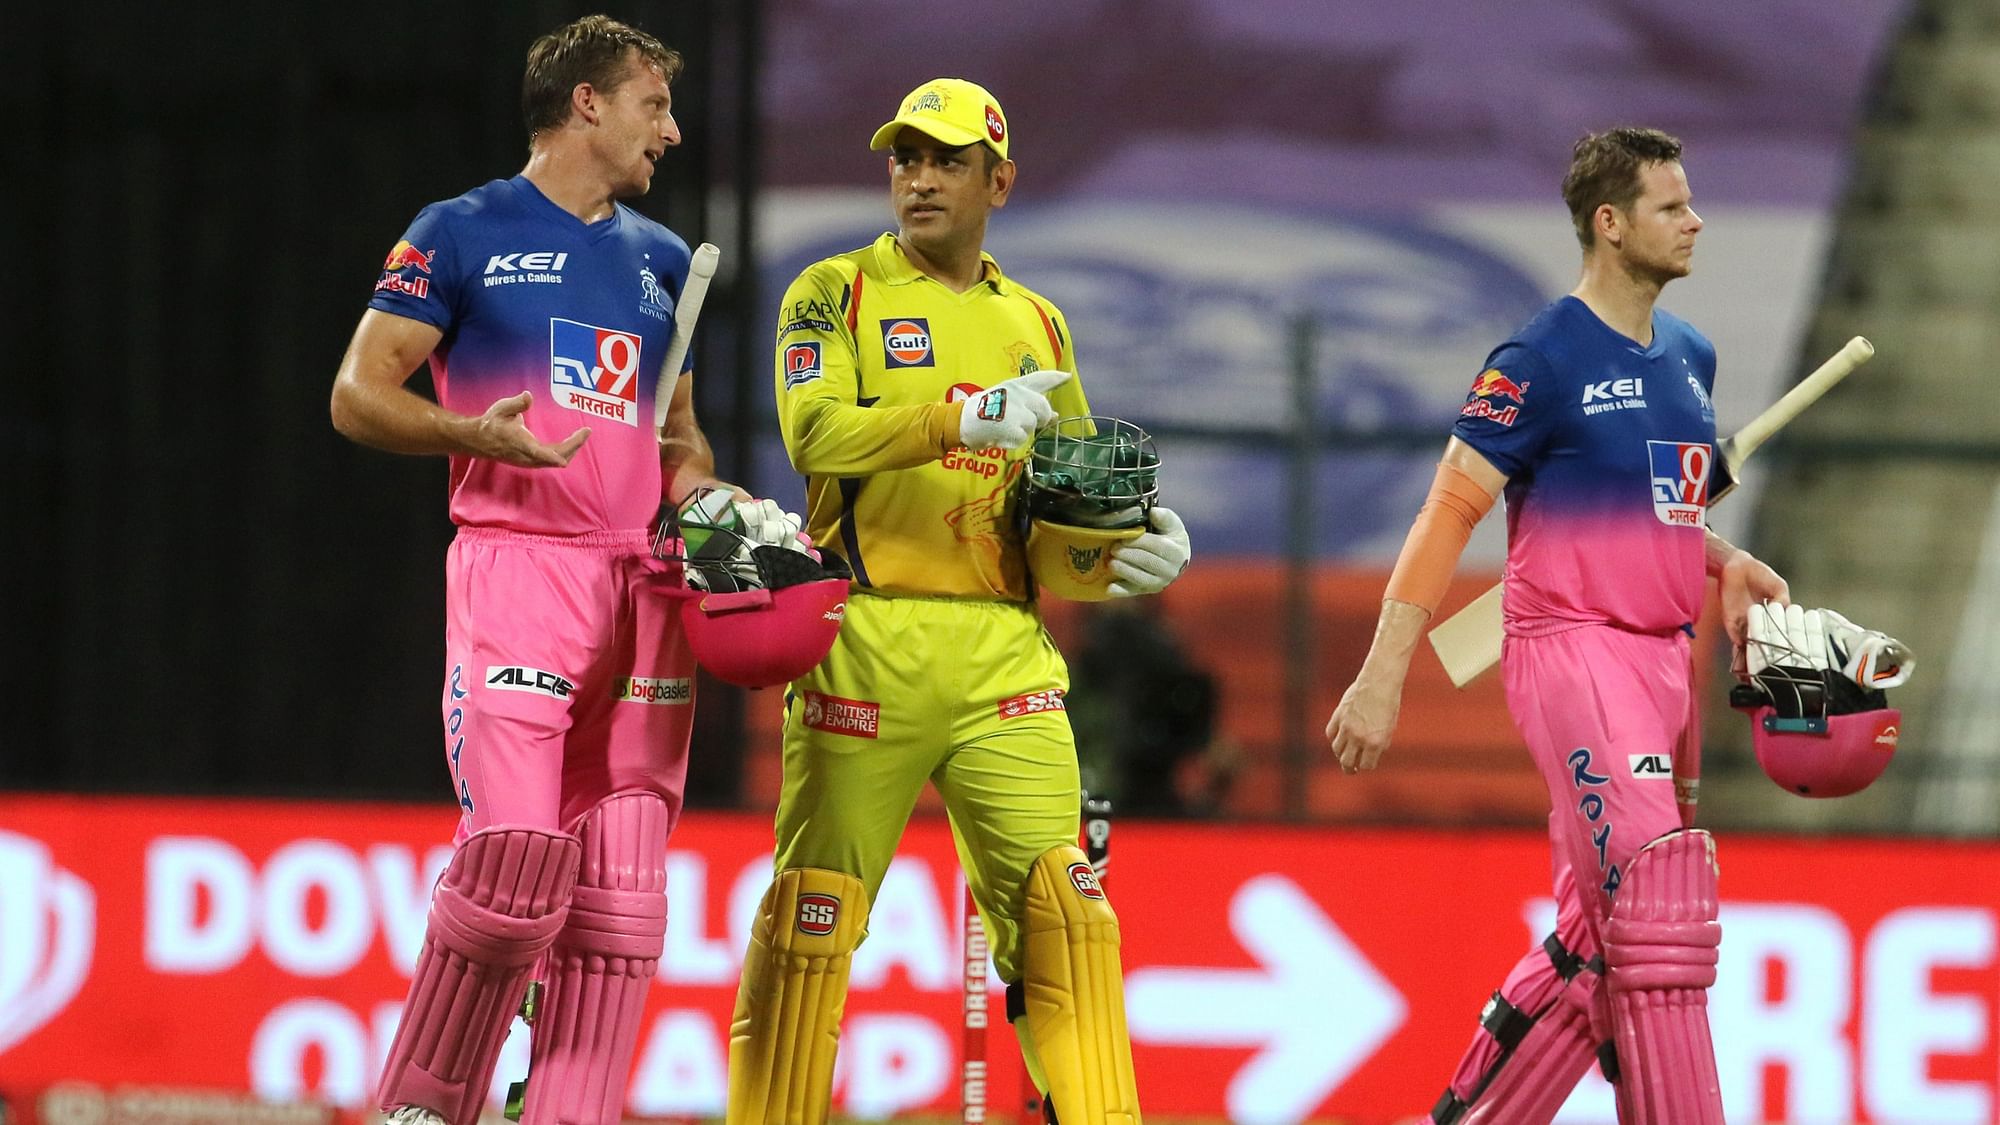 Rajasthan Royals would be hoping that CSK beat KXIP on Sunday.